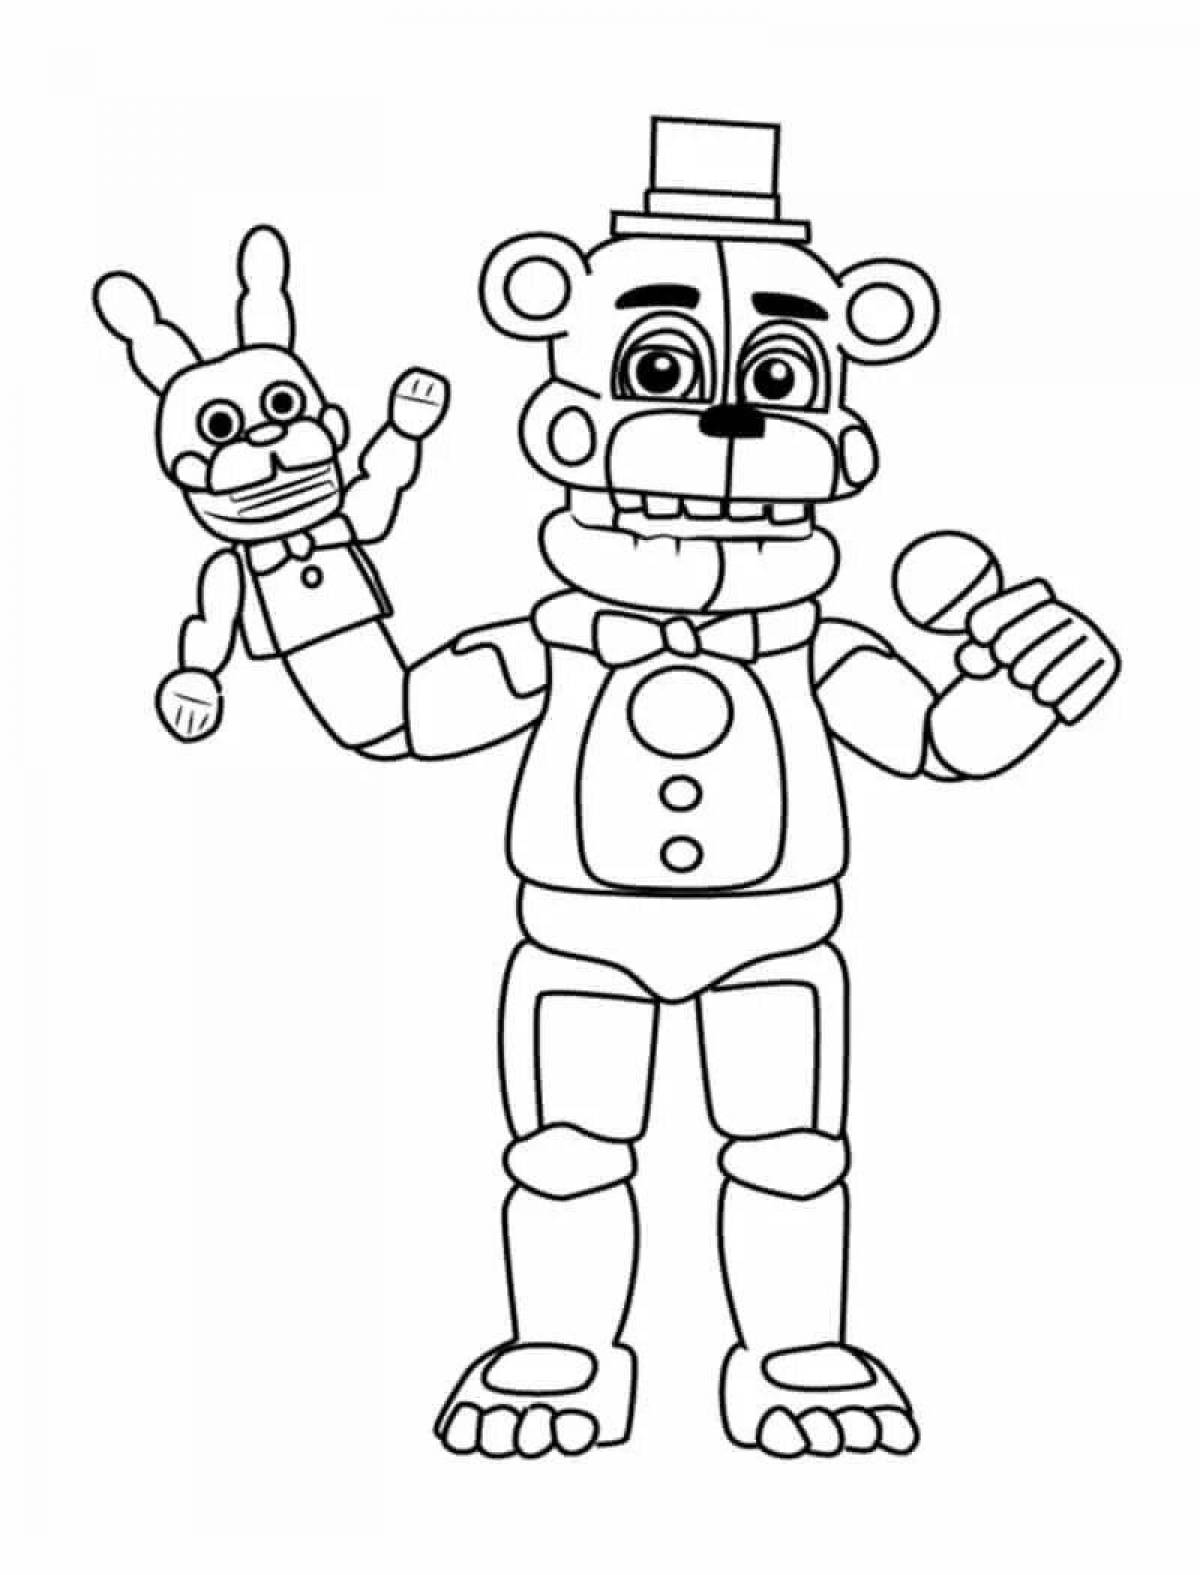 Coloring freddy for kids